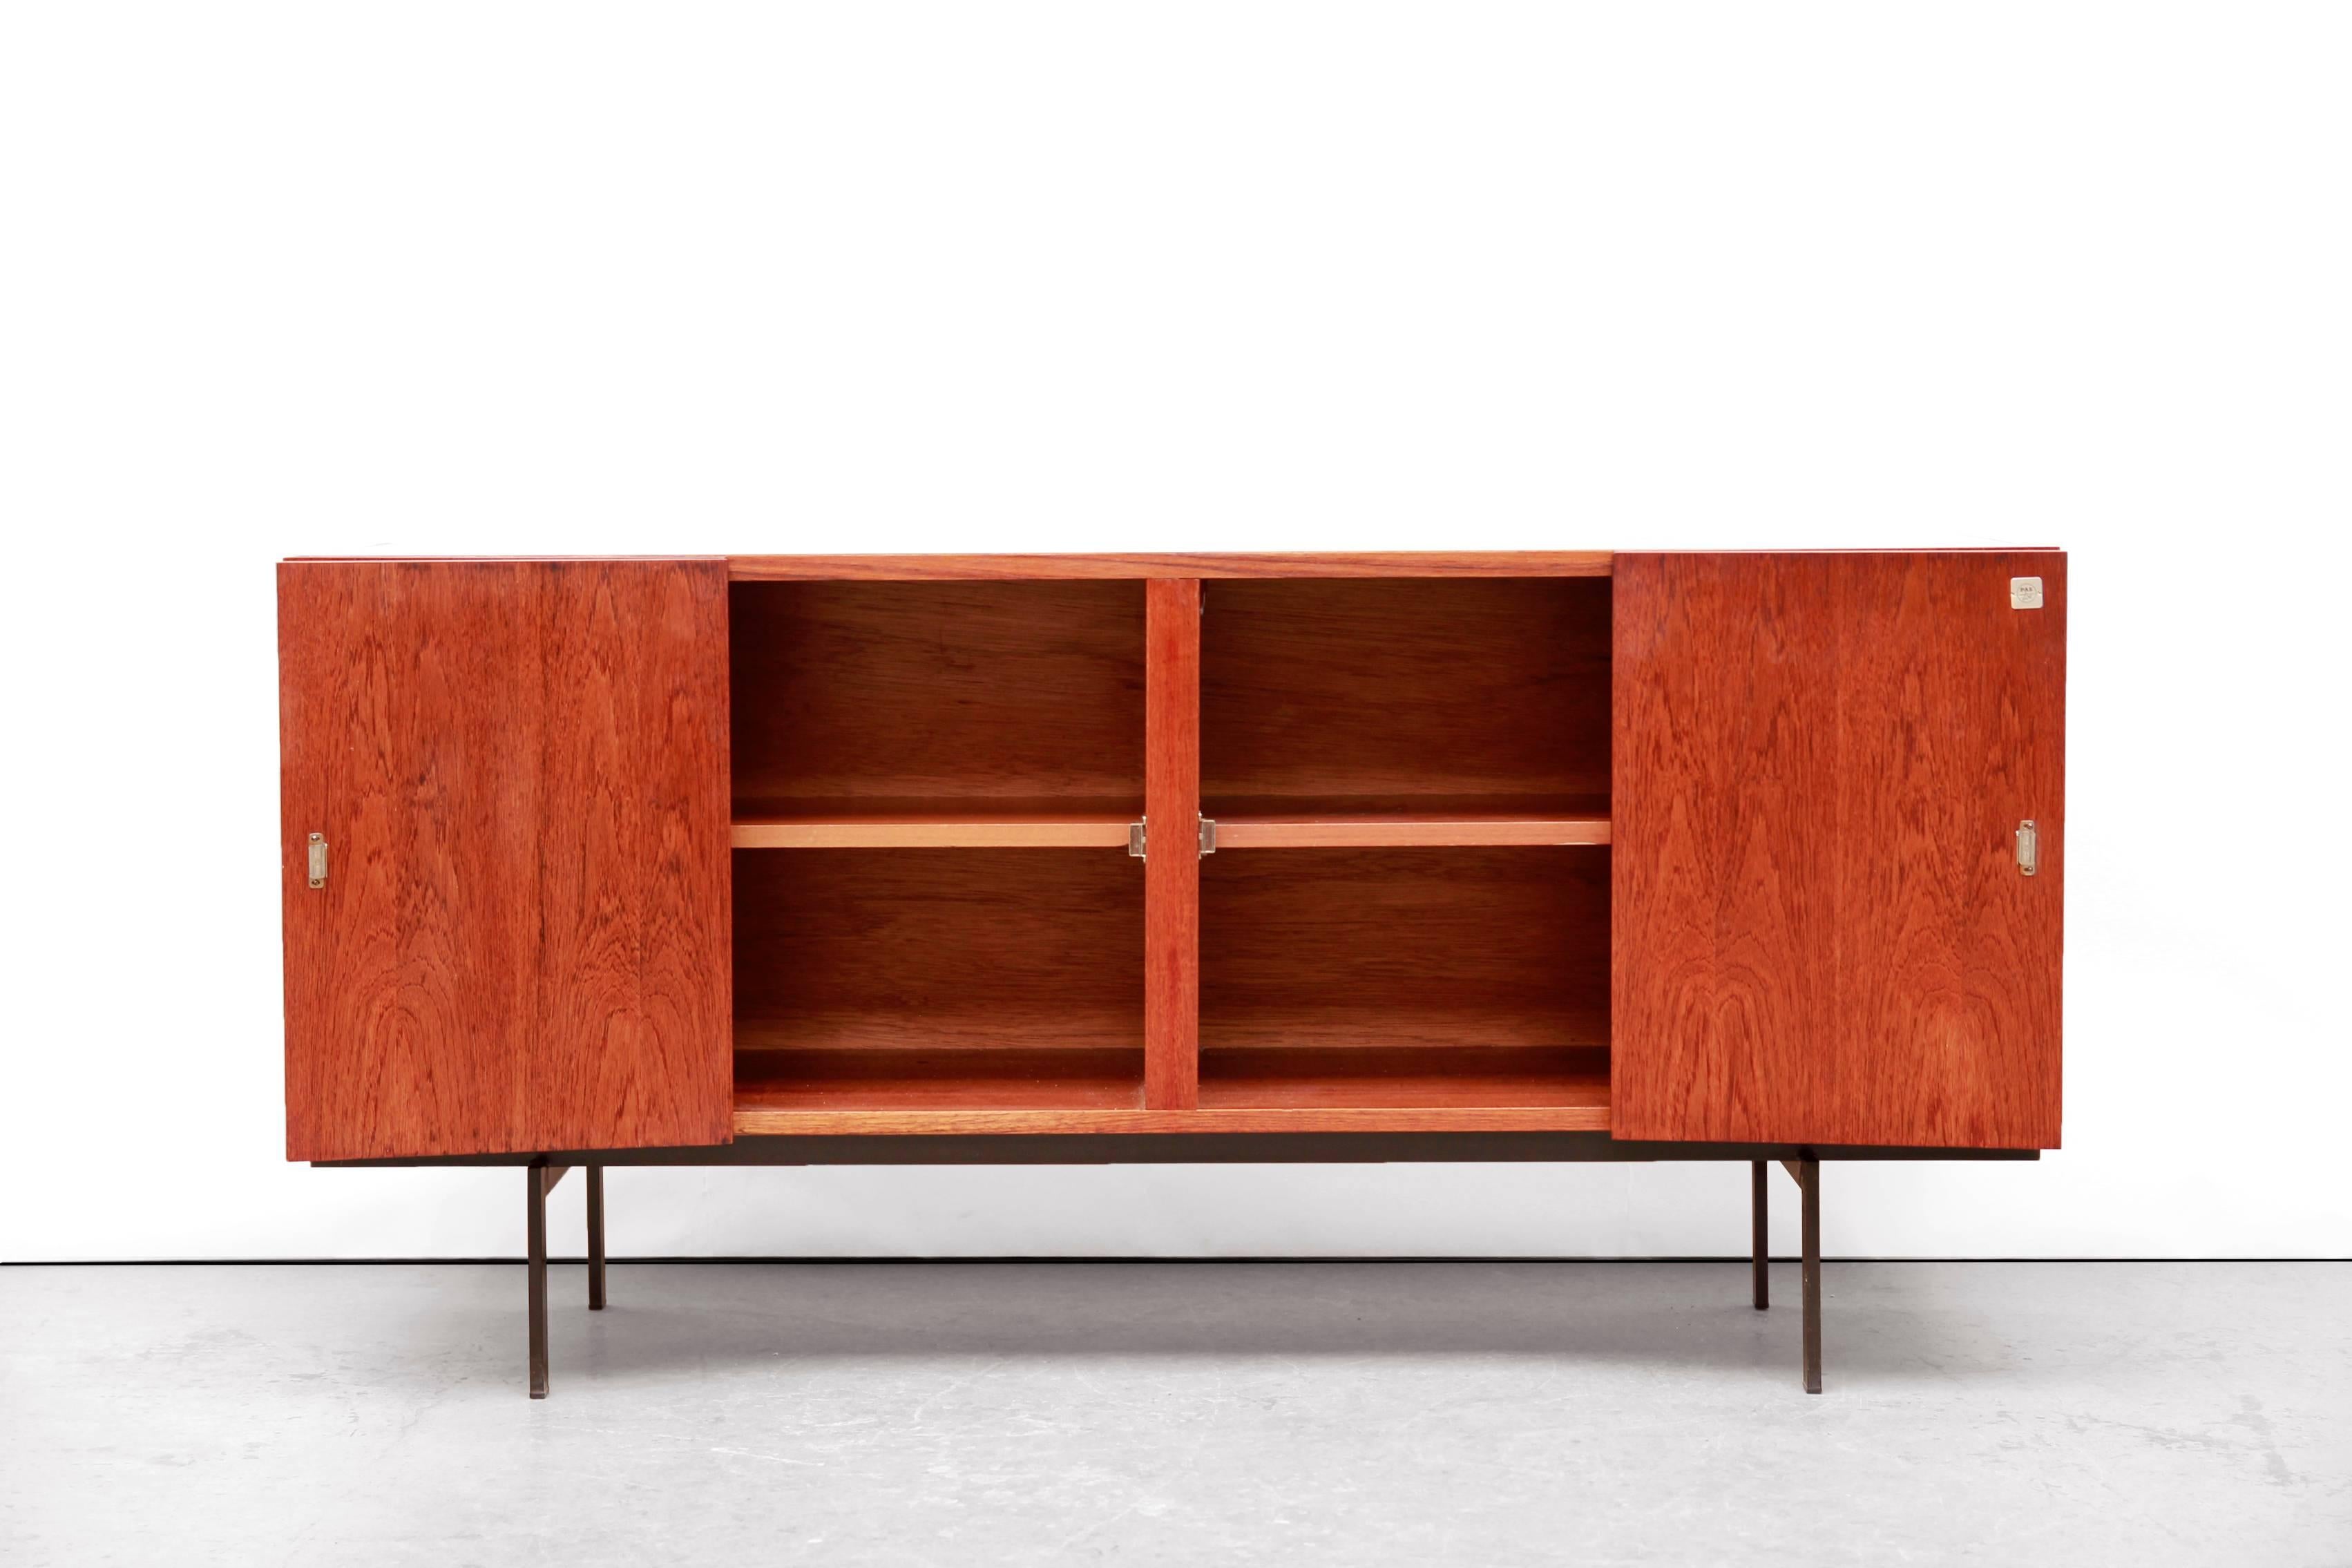 Beautiful Minimalist sideboard designed by Cees Braakman for Pastoe in The Netherlands in the early 1960s. This sideboard comes from the well-known series of Pastoe which has been renamed the 'Japanese Series' by its sleek shapes and simplicity. The